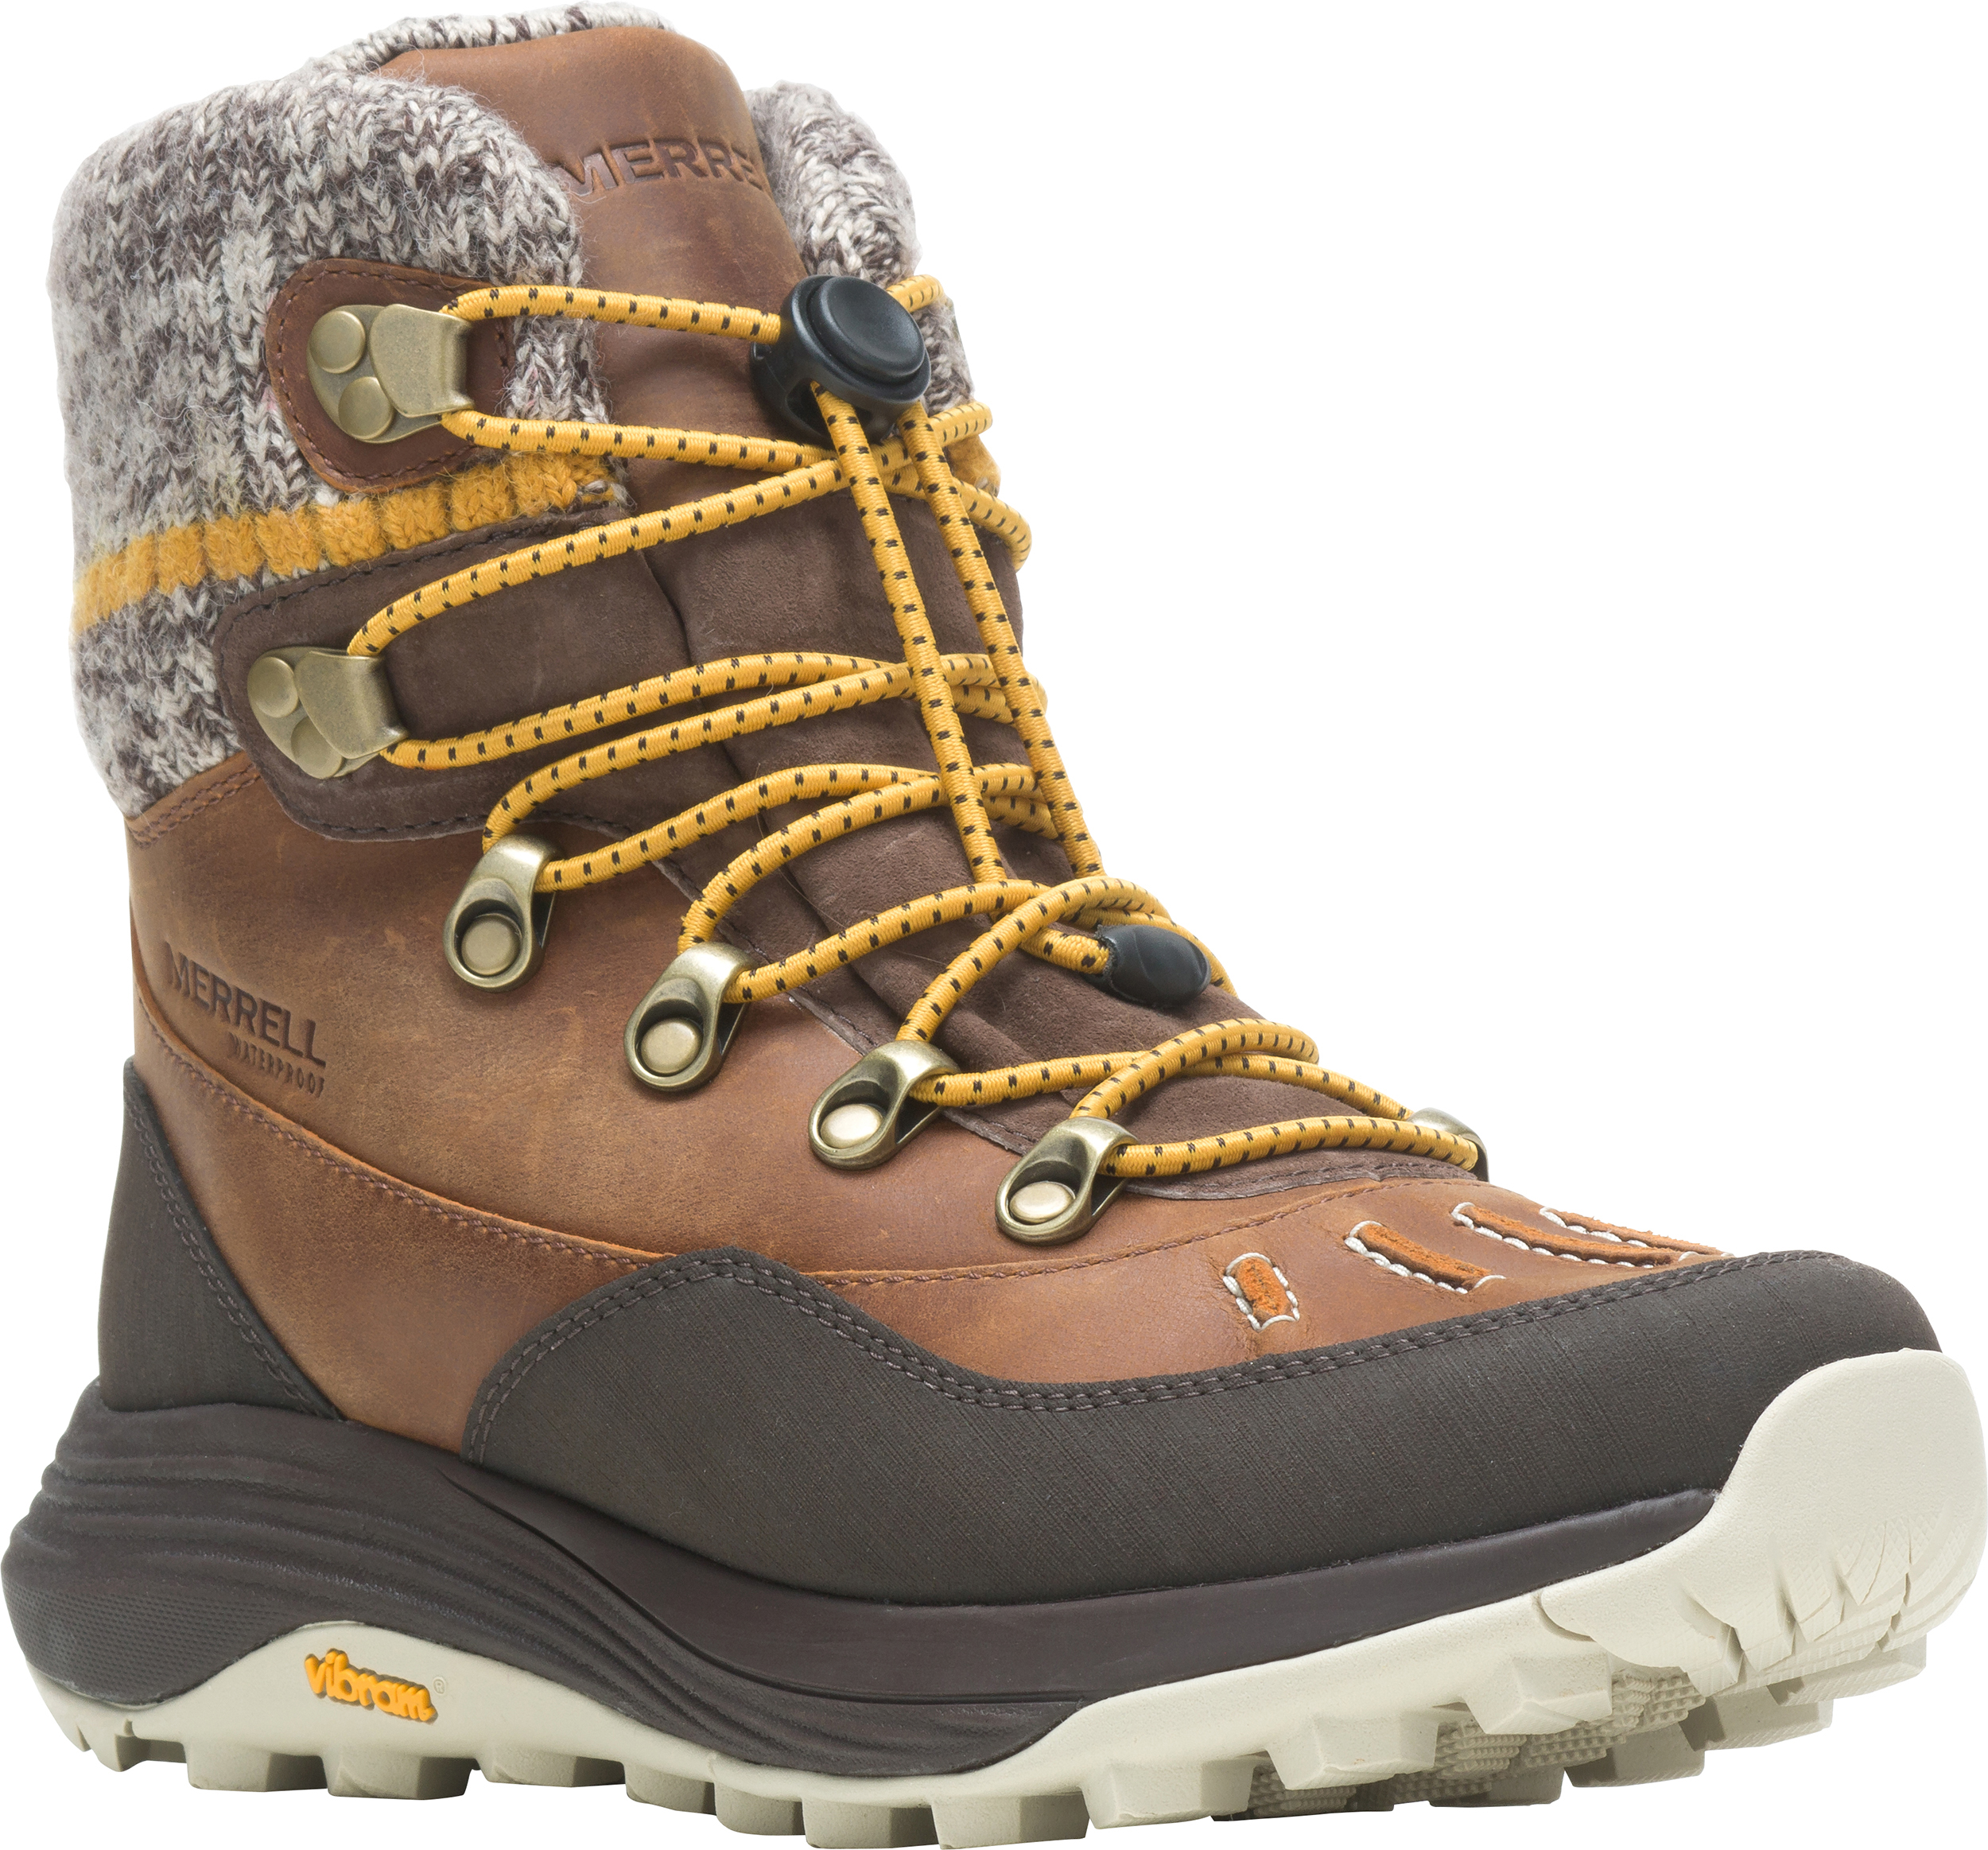 Merrell Women's boots Siren 4 Thermo Demi Waterproof boots (Size 8)